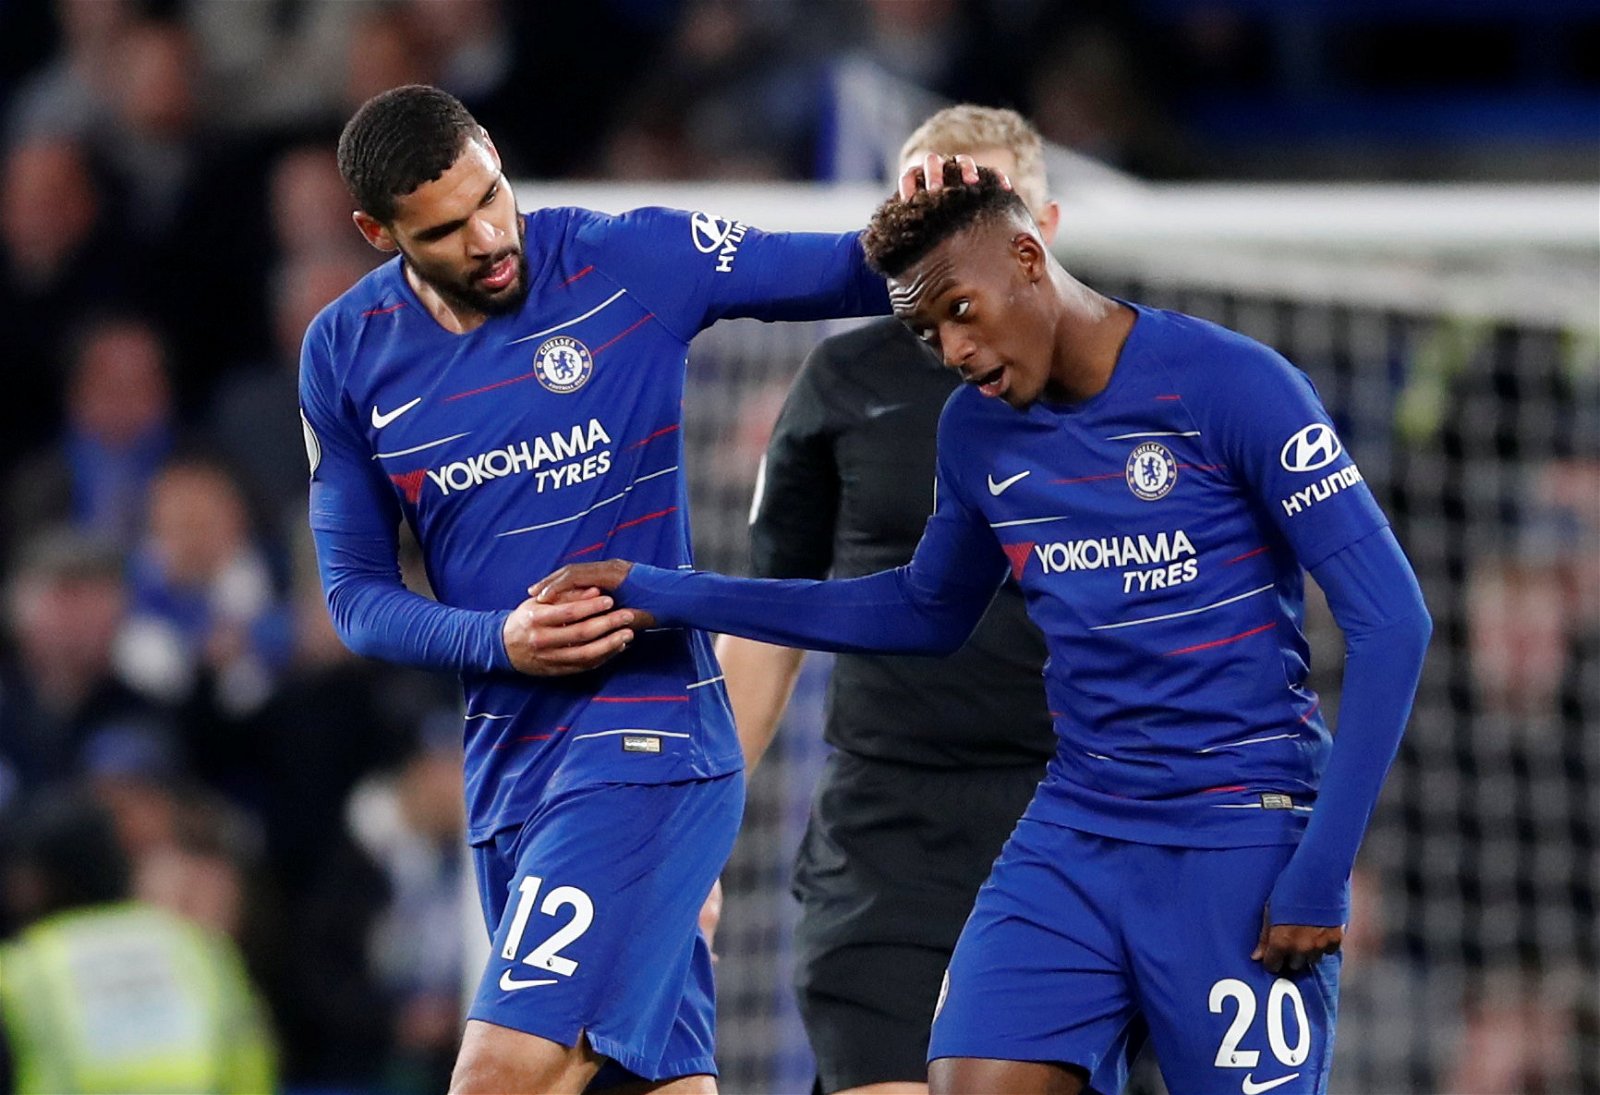 Chelsea youngster on the brink of signing lucrative contract